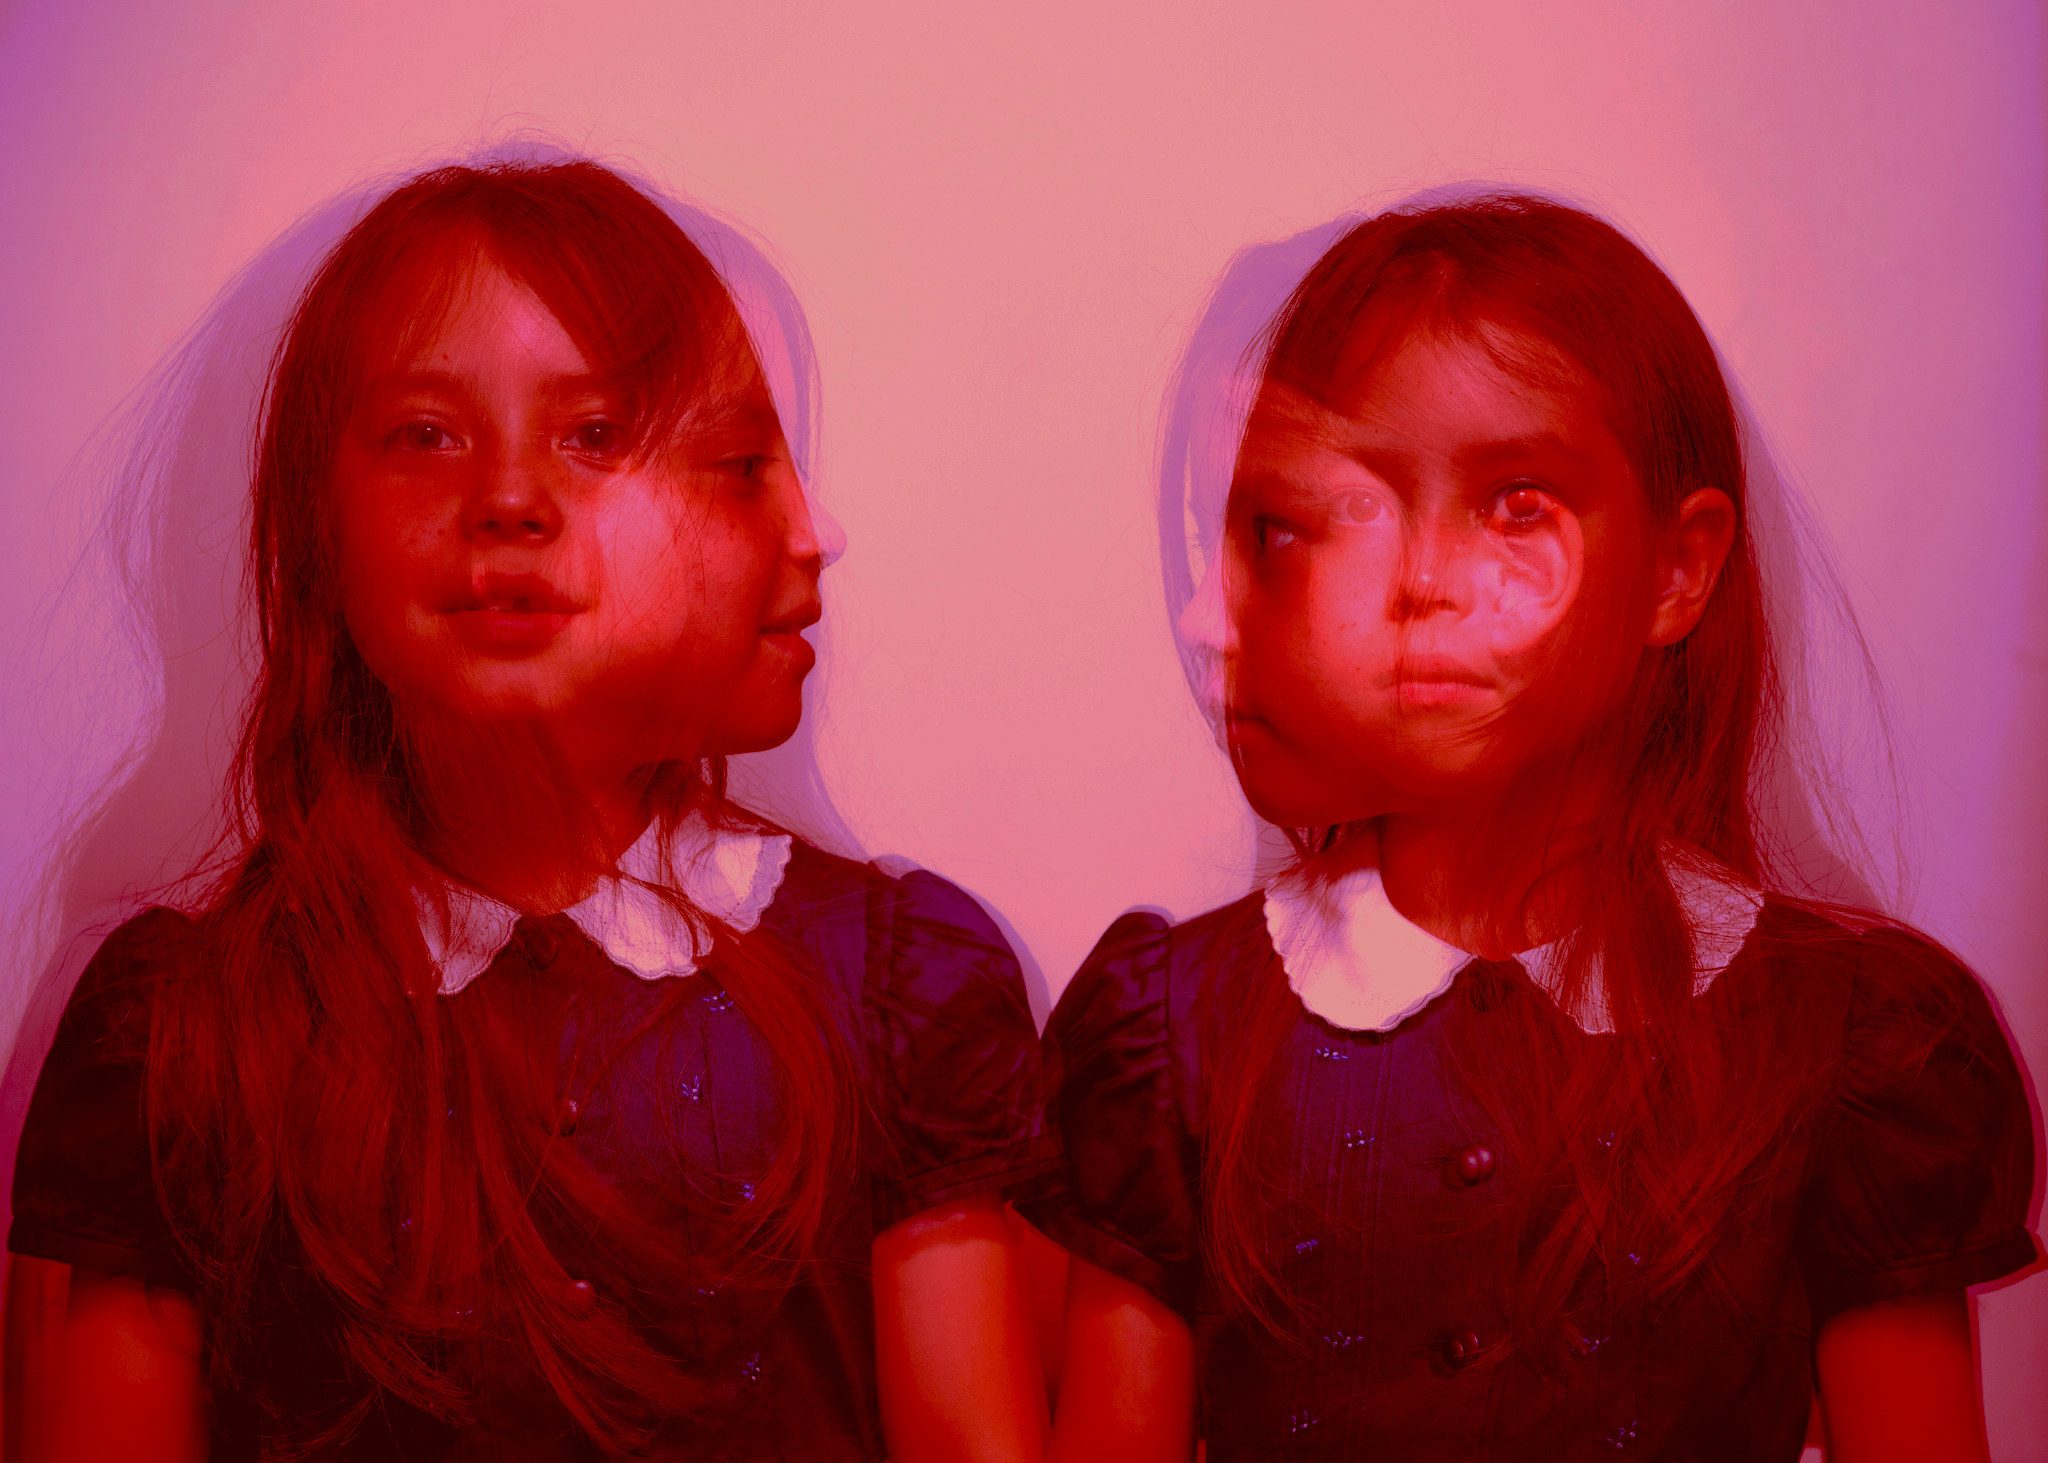 Two young girls looking forward and back at each other in the same image, with a red overlay